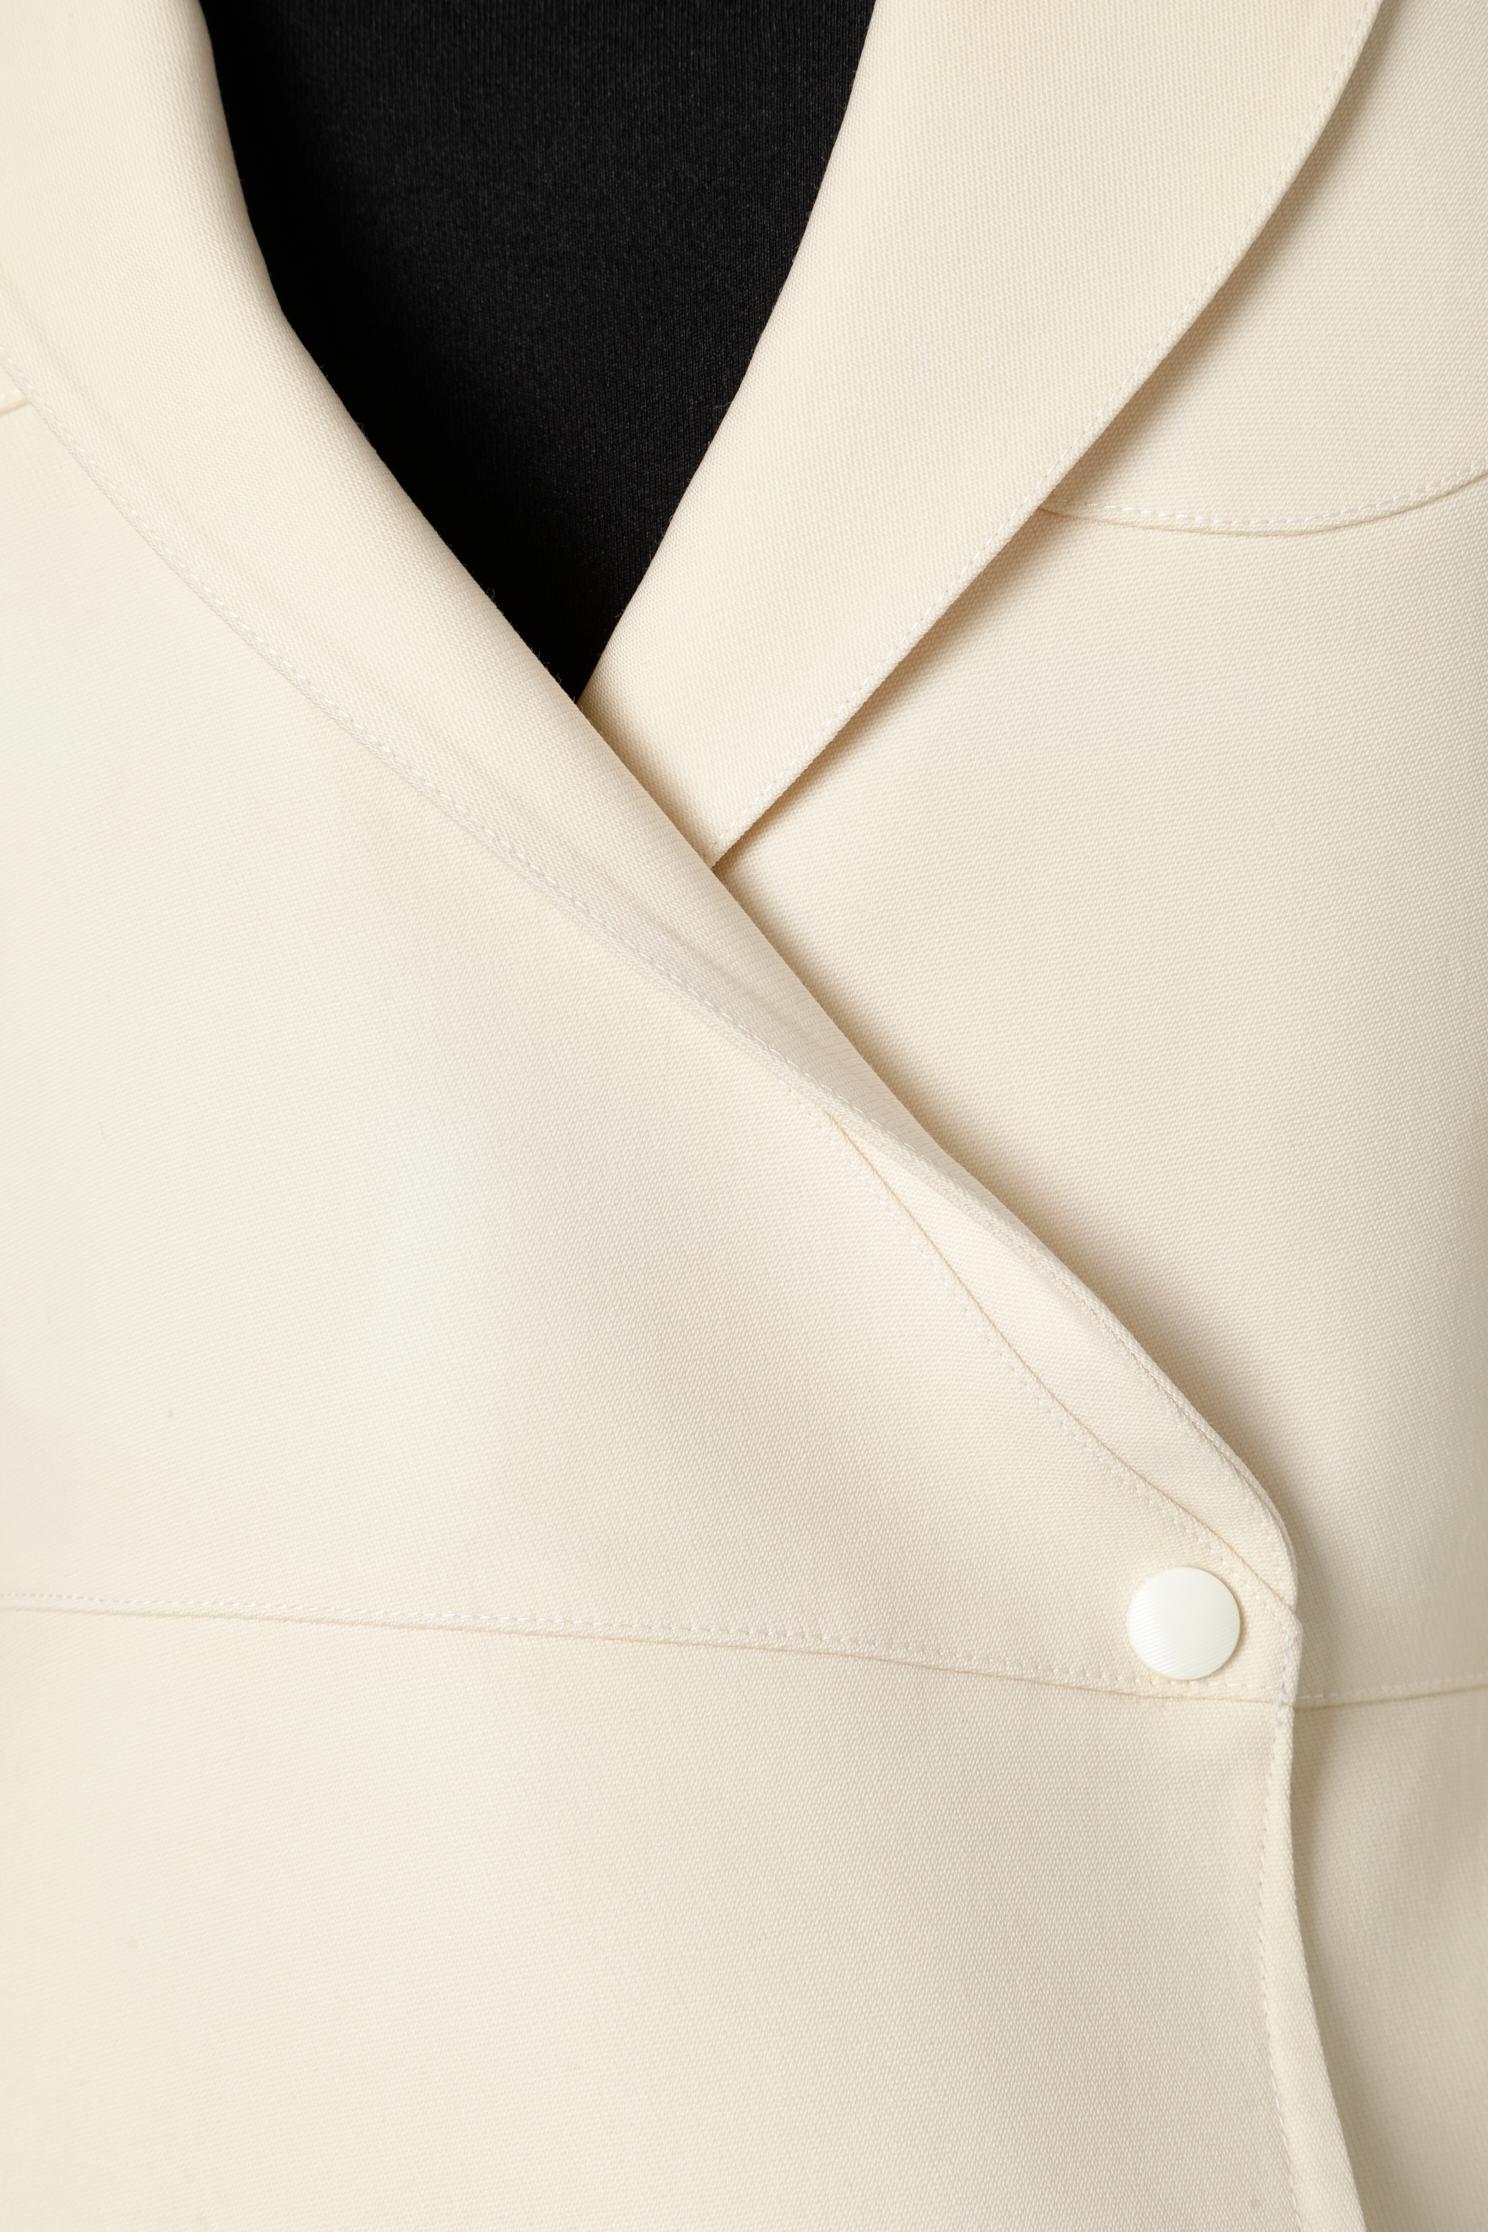 Ivory double-breasted jacket in wool Thierry Mugler For Sale at 1stDibs